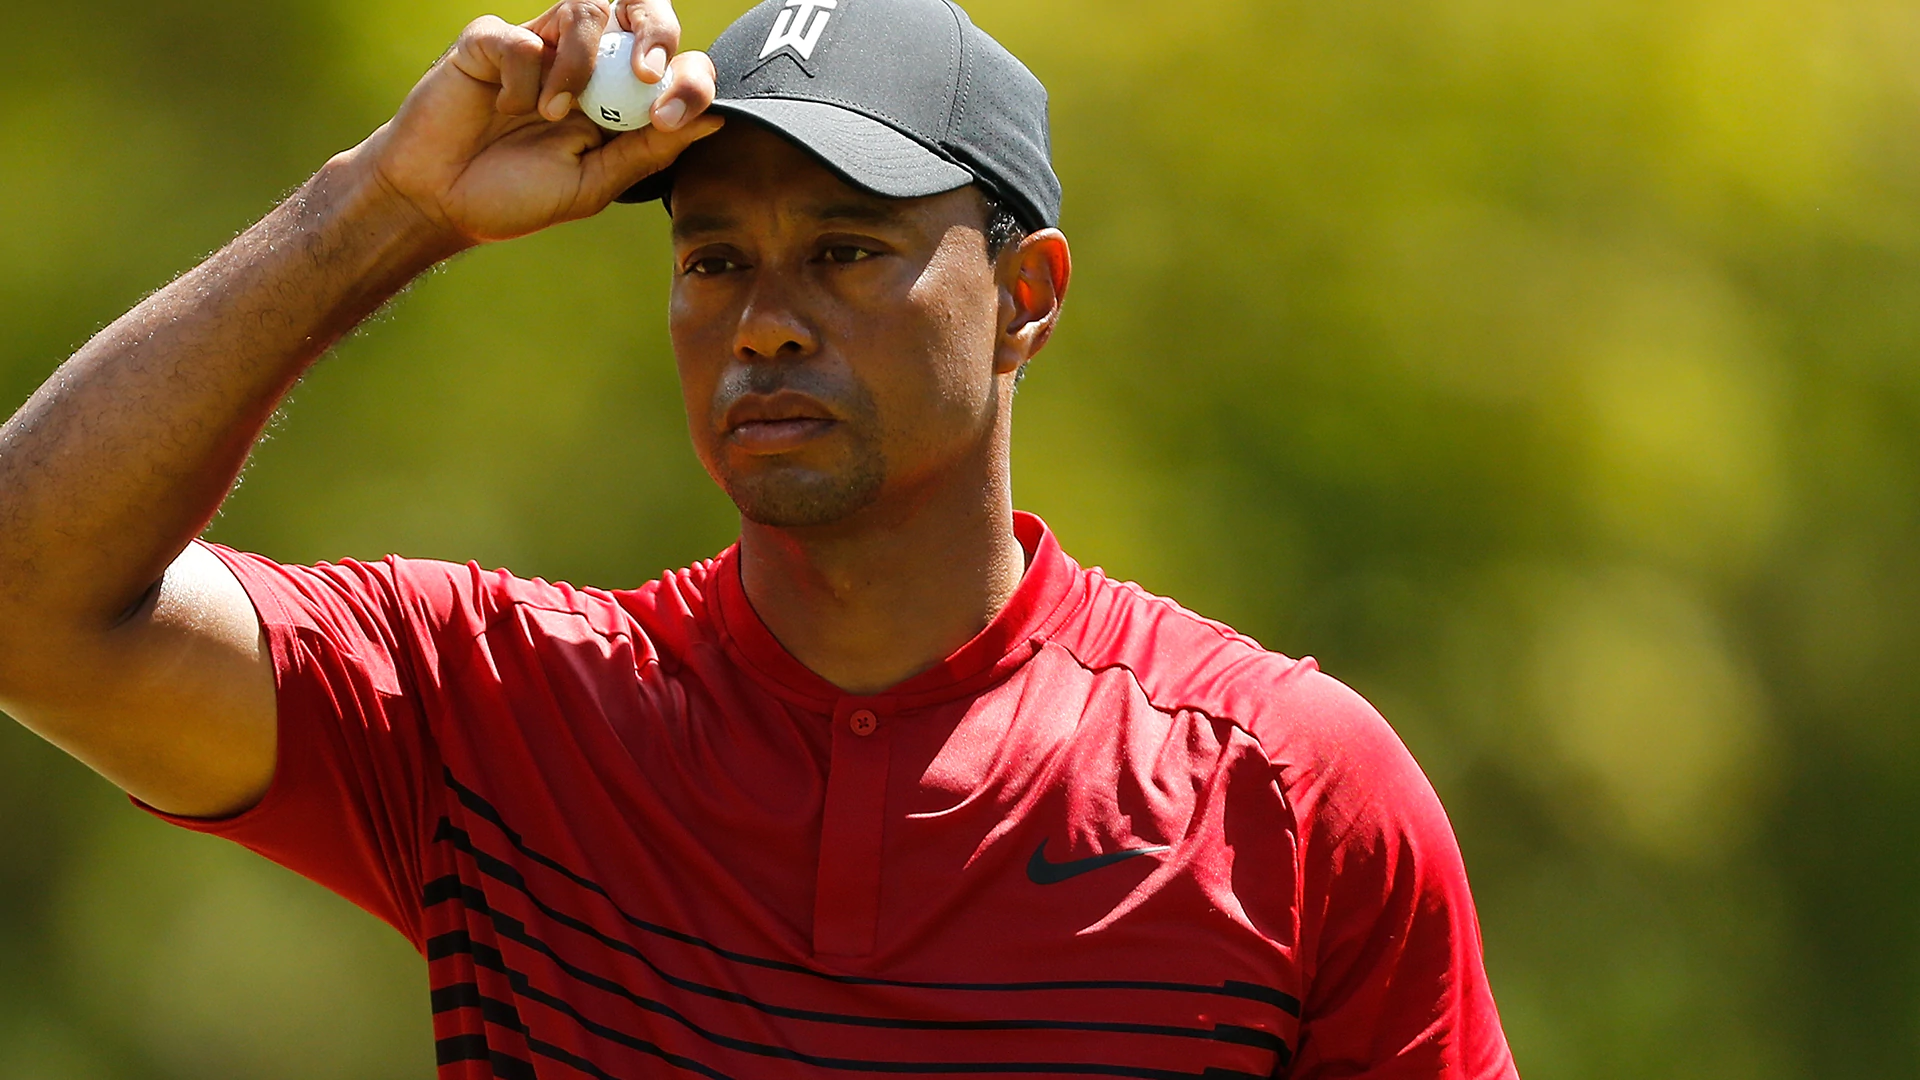 Valspar purse payout: Another half-million to Tiger's total